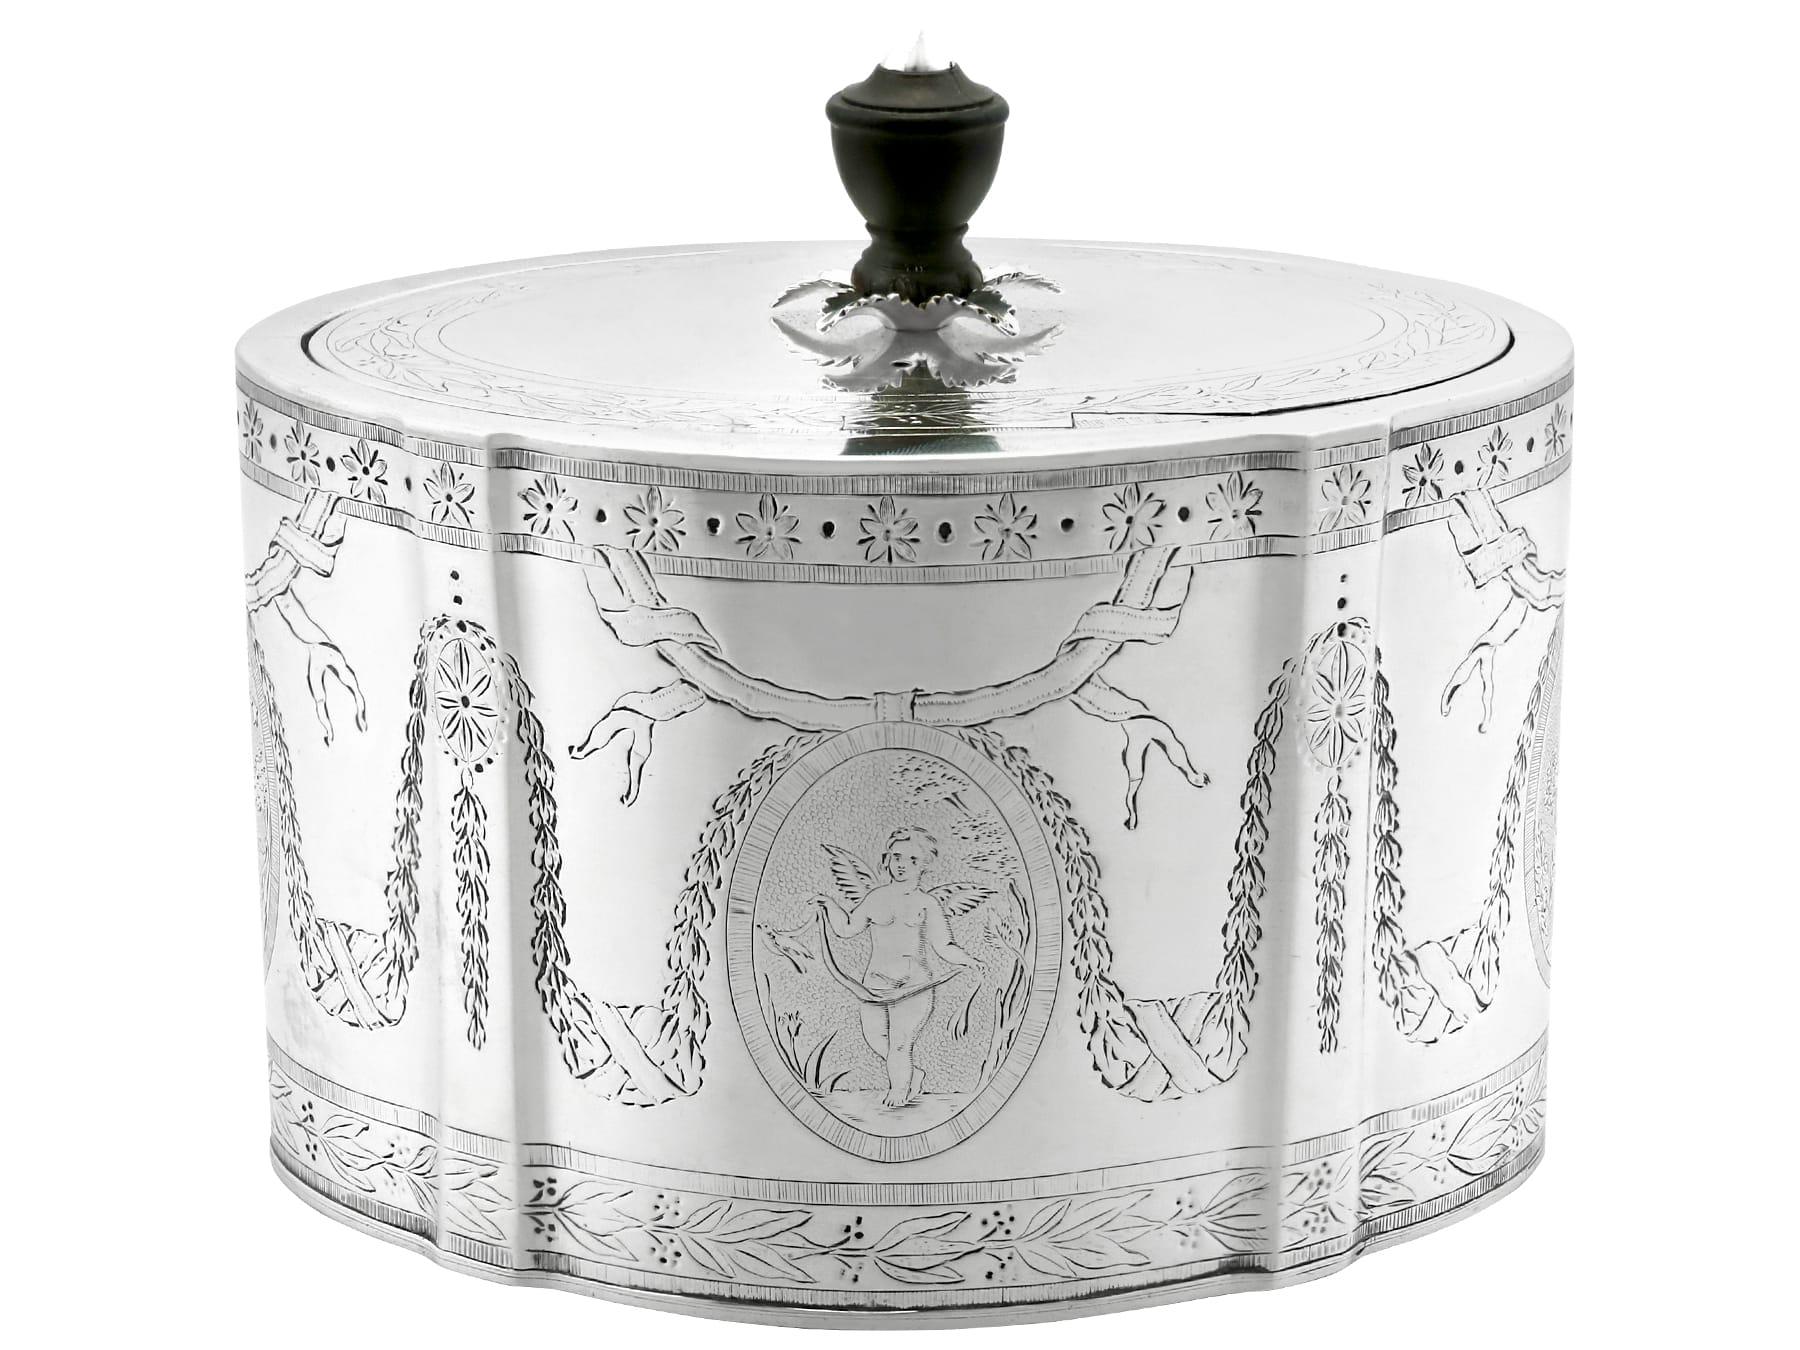 Antique George III Sterling Silver Locking Tea Caddy (1783) For Sale 1